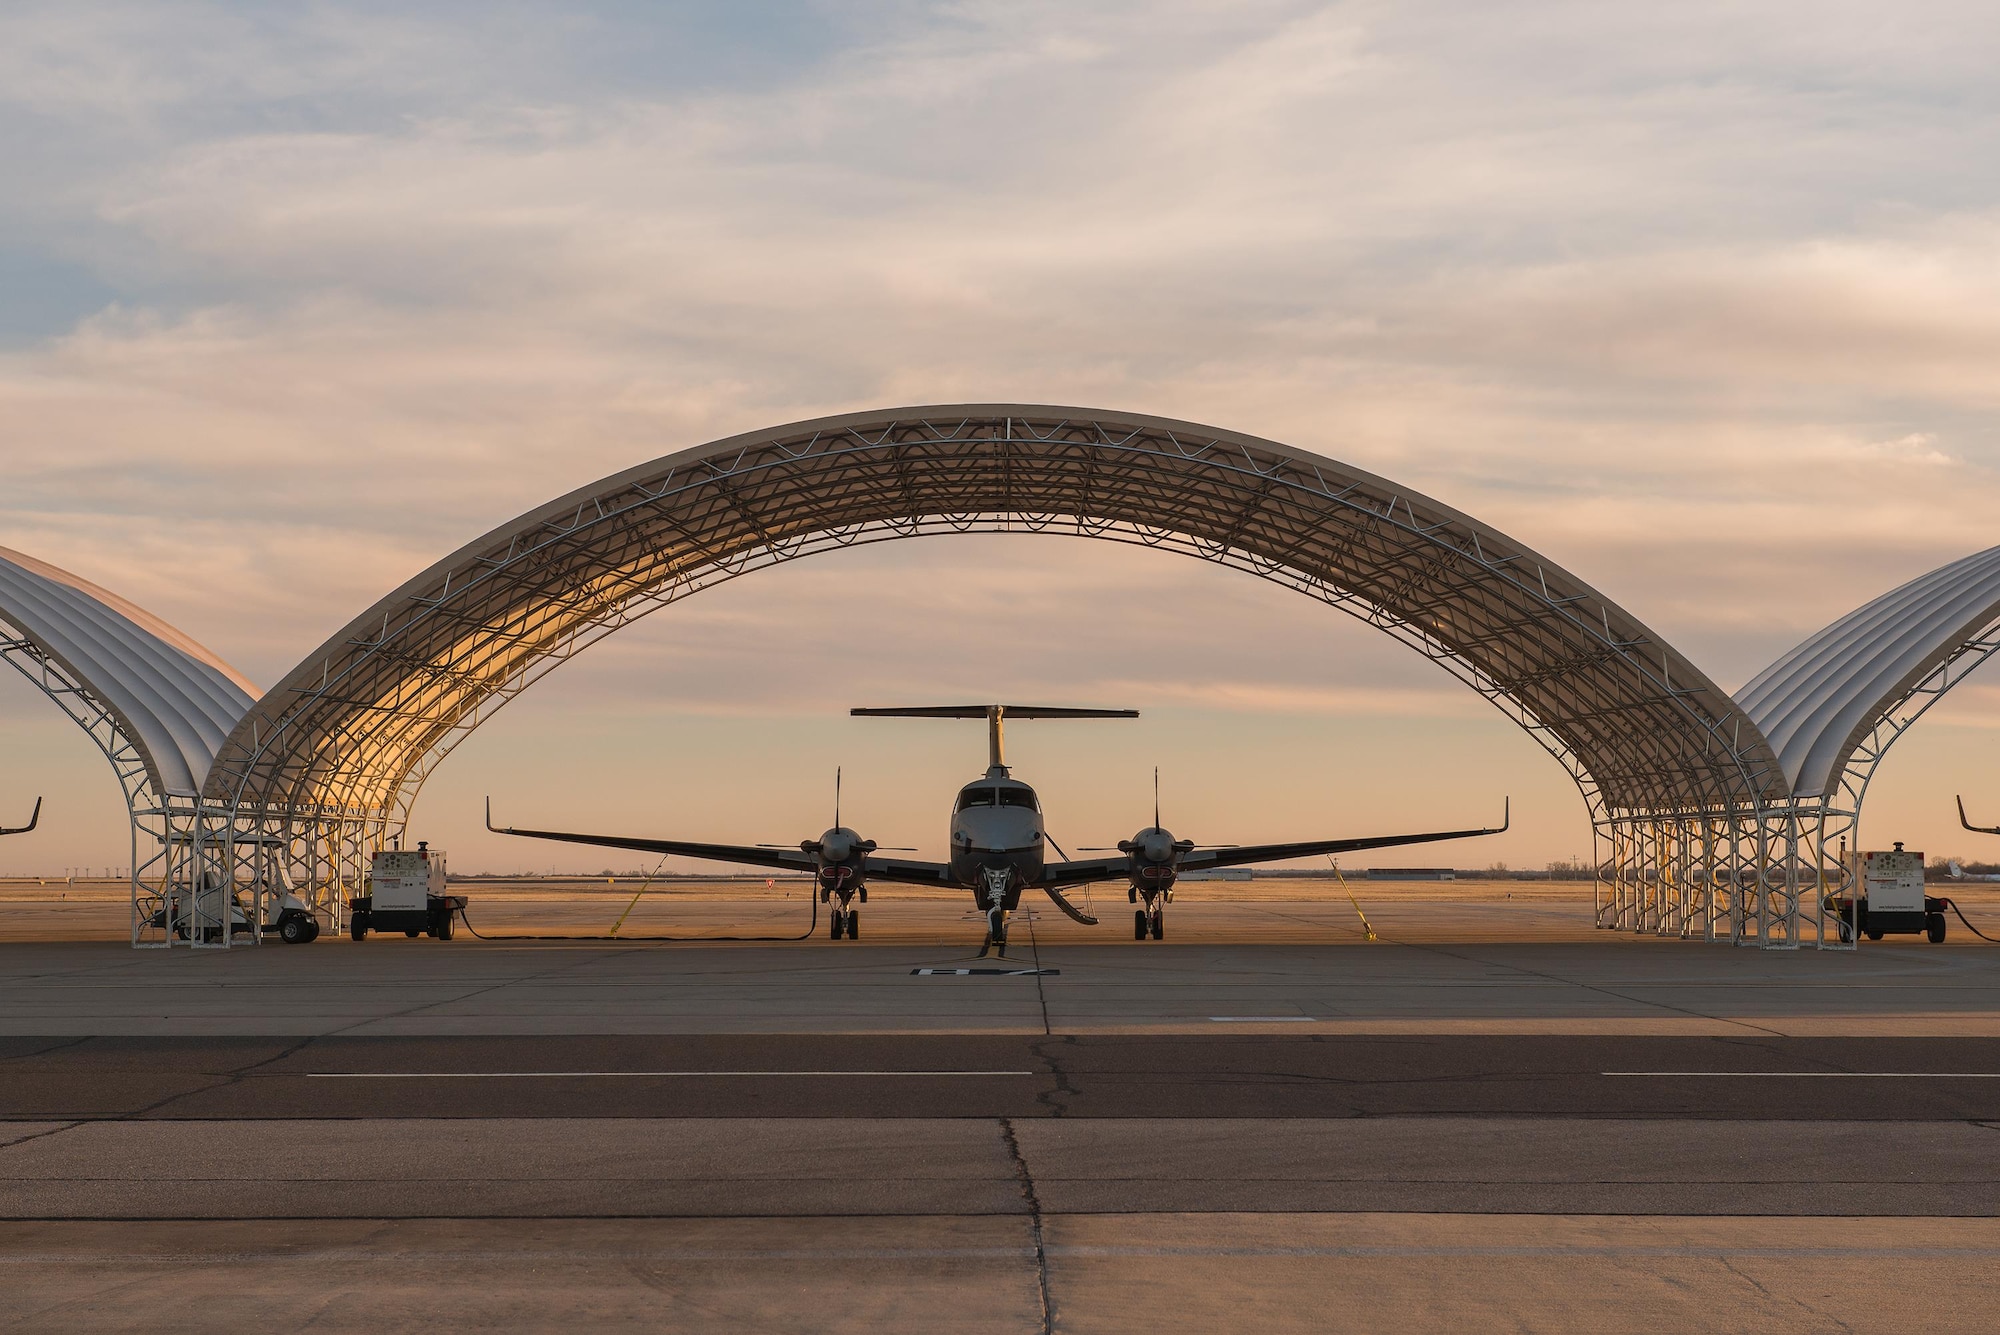 MC-12W's from the 137th Special Operations Wing, Oklahoma City, are parked under eight new aircraft shelters for the Will Rogers Air National Guard Base flight line, January 31, 2016. The shelters provide protection for the aircraft and the Airmen and contractors who work on them. (U.S. Air National Guard photo by Senior Master Sgt. Andrew M. LaMoreaux)